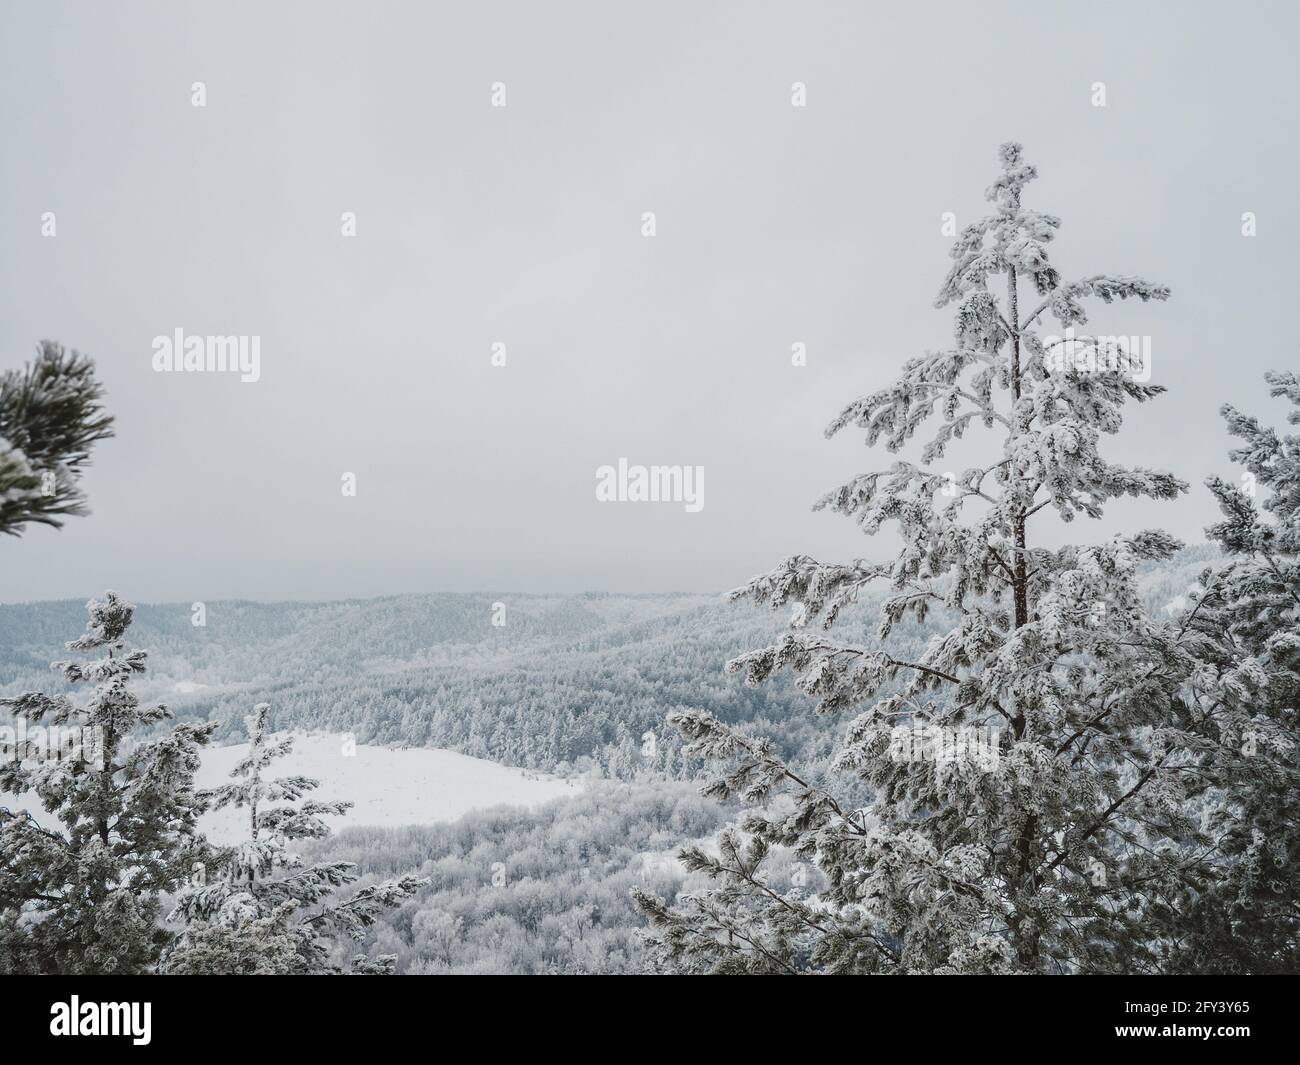 Snow covered forest with pines in mountain landscape Stock Photo